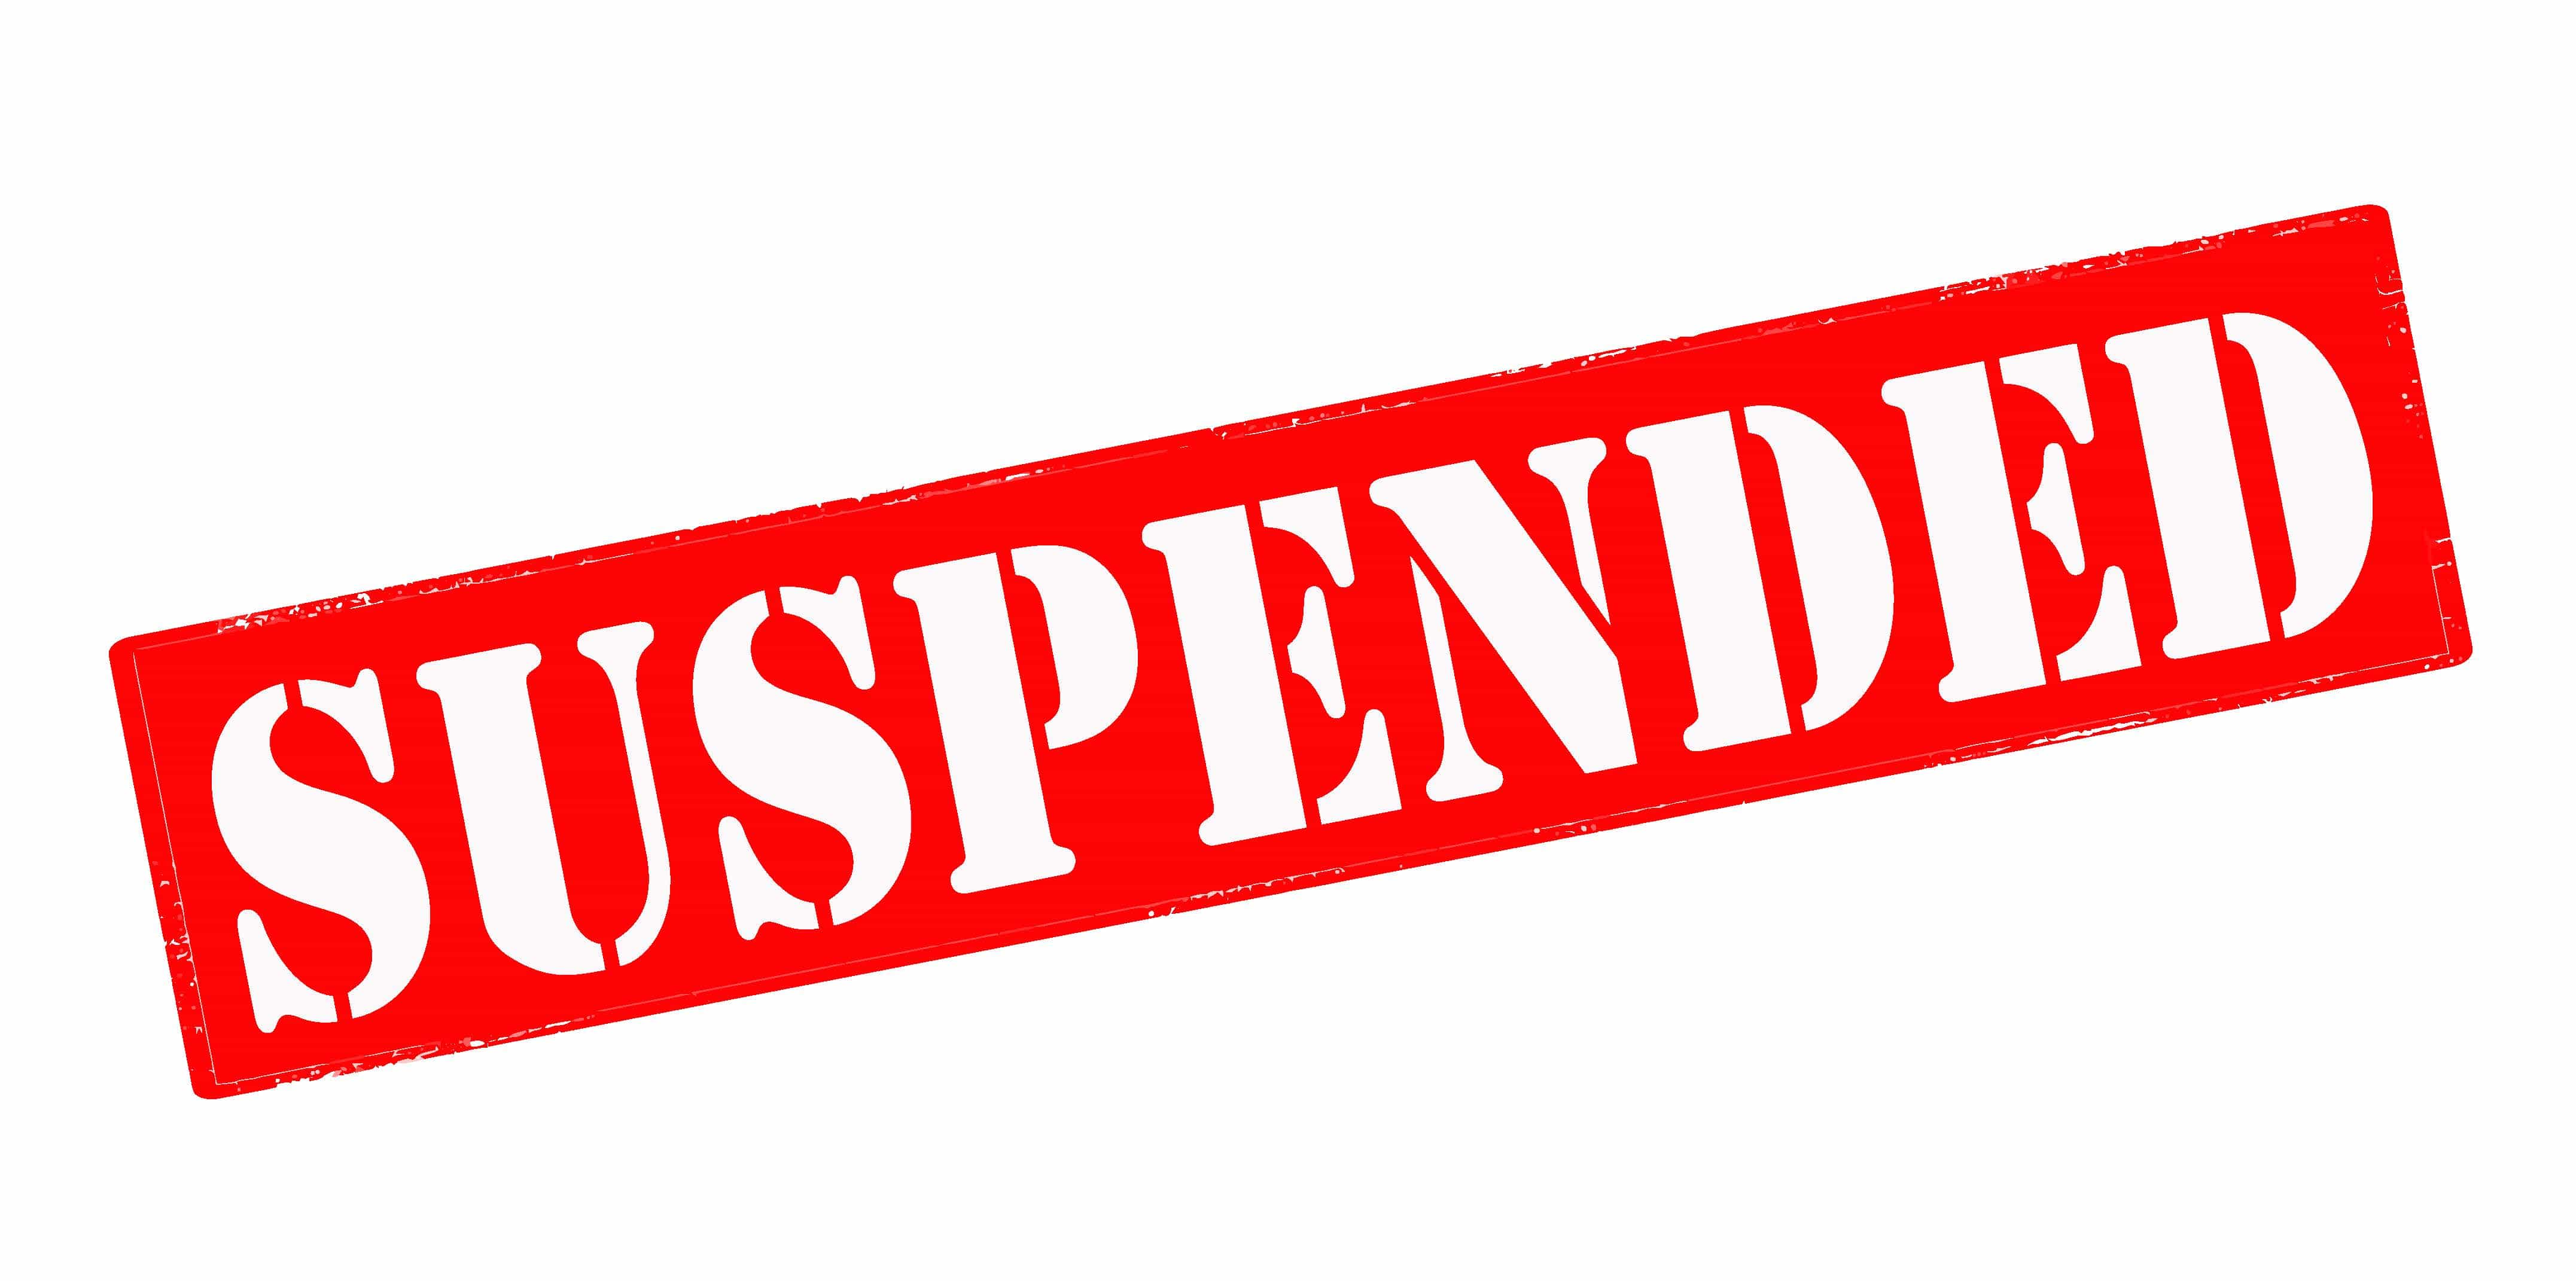 In charge CEO Handwara suspended | GNS